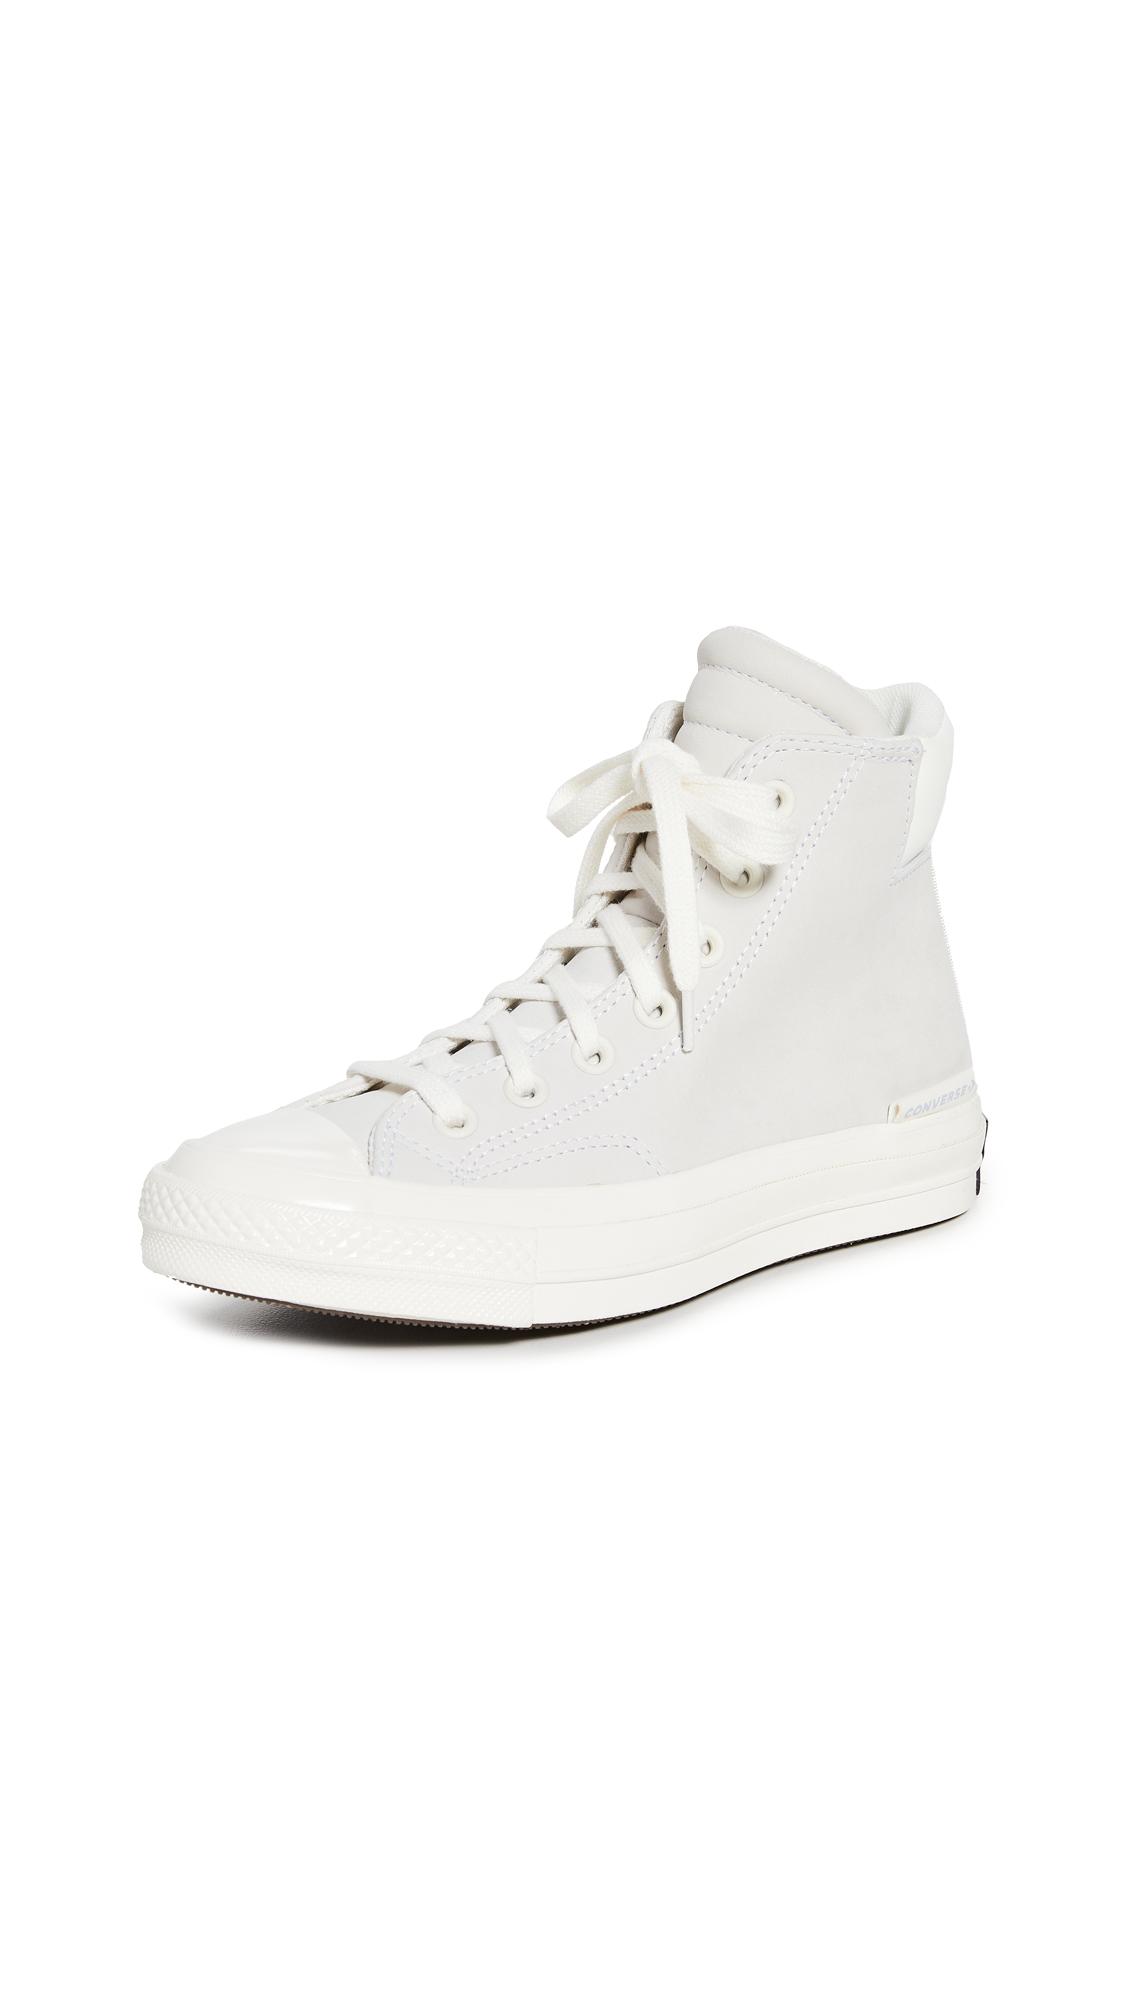 Converse Chuck 70 Padded Collar High Top Sneakers in White | Lyst